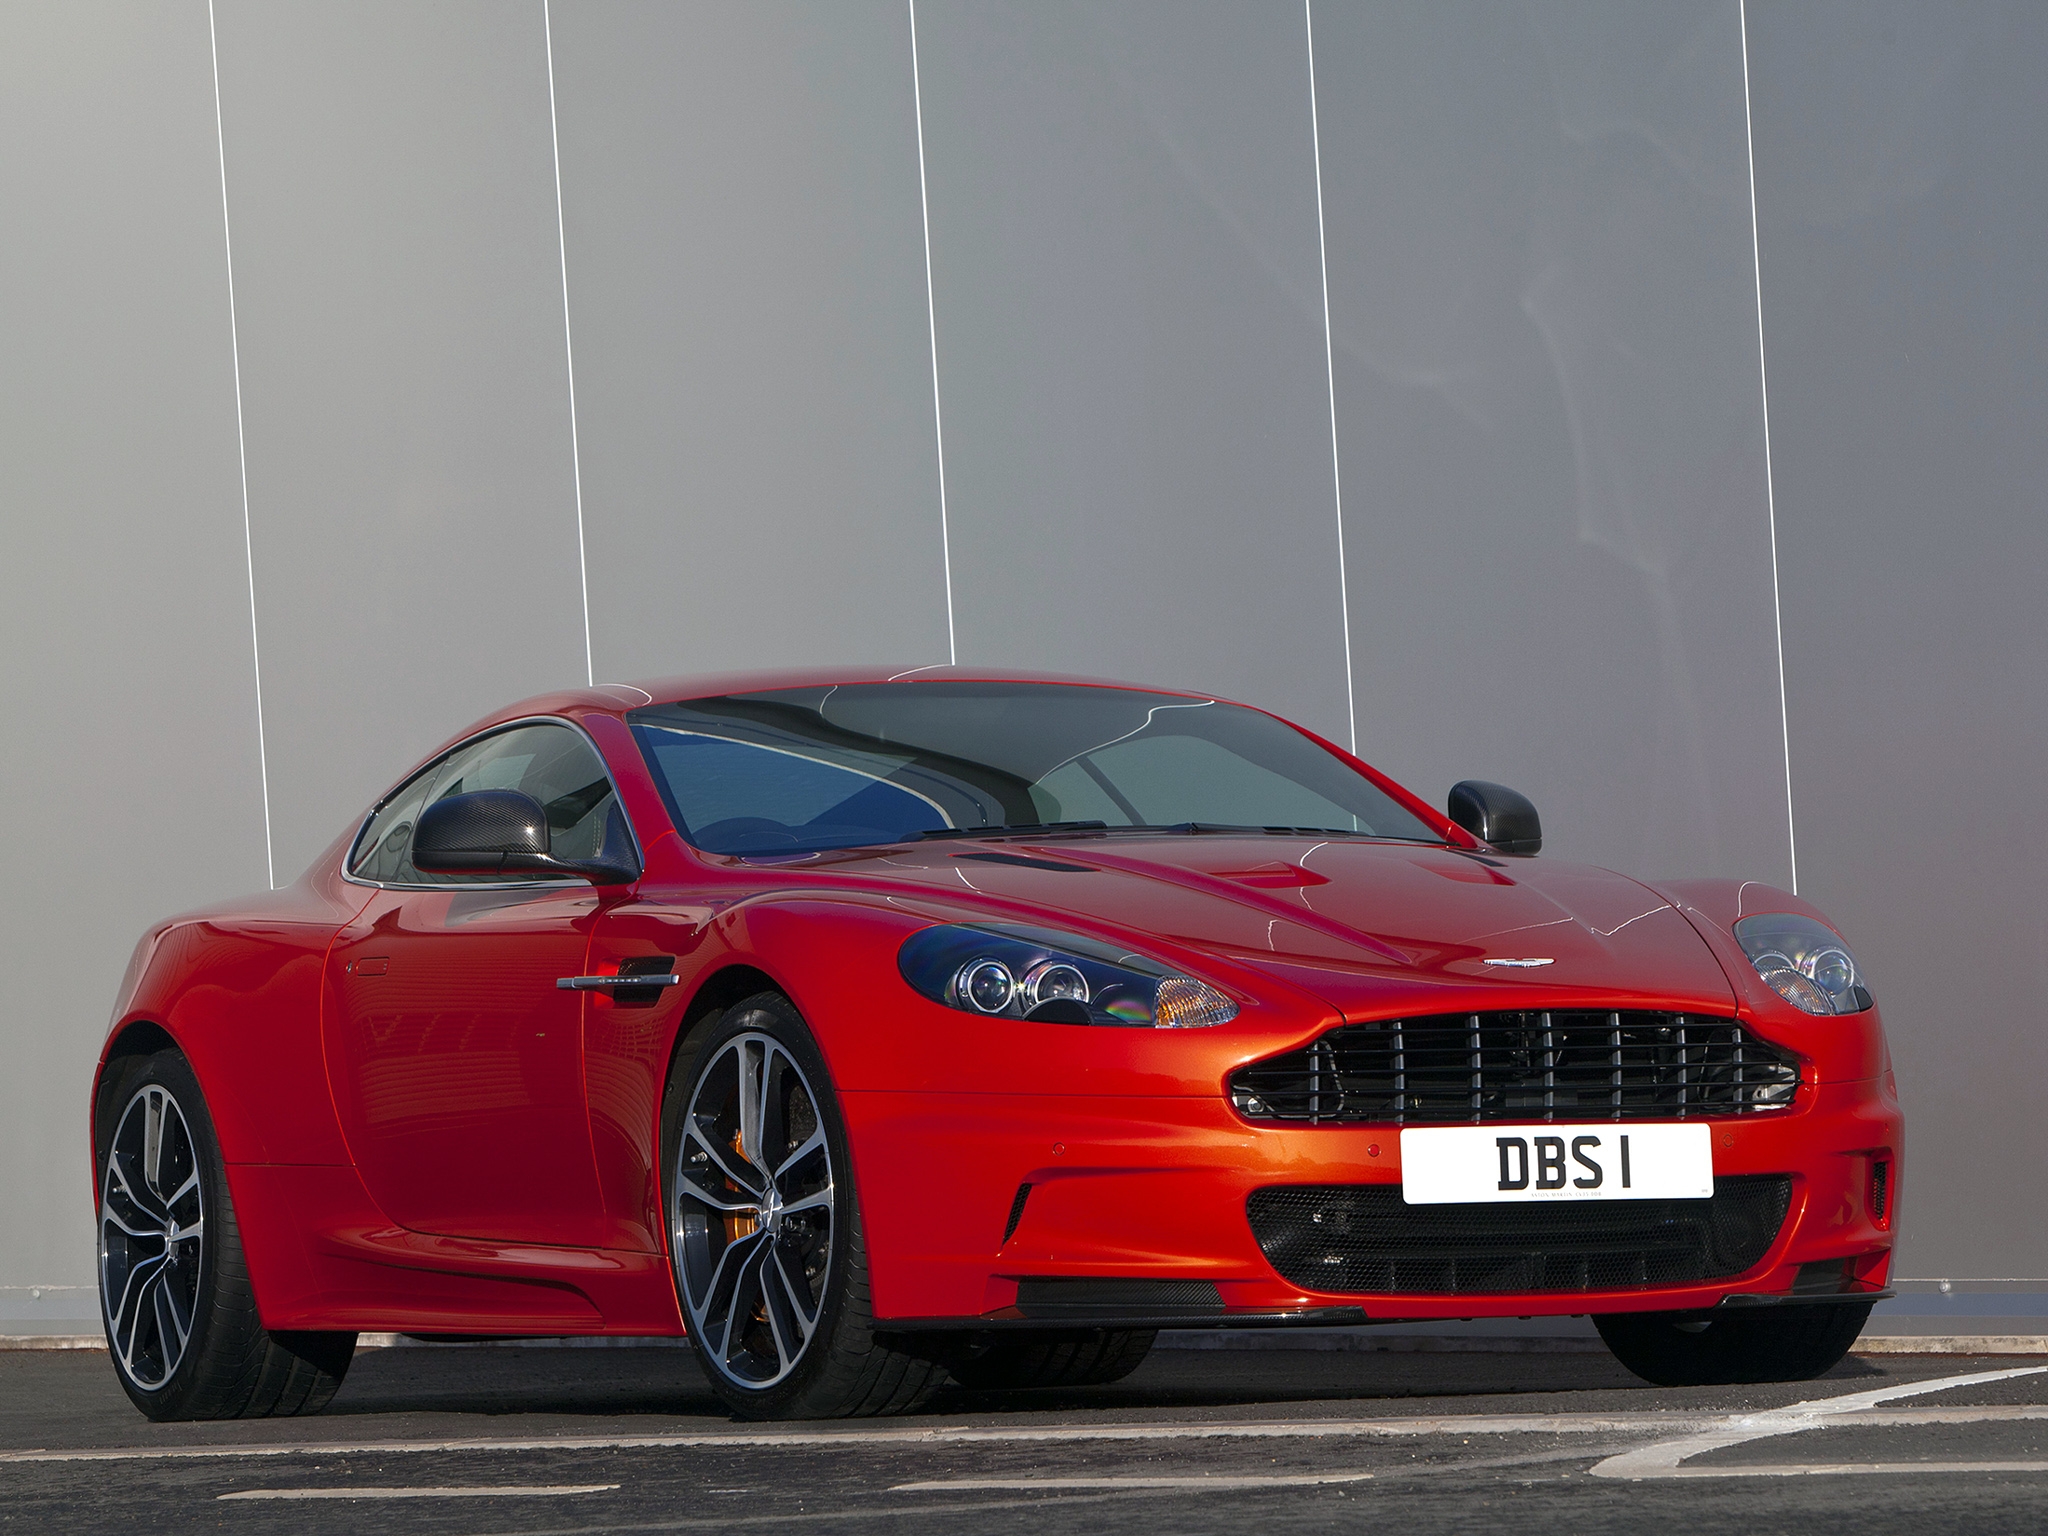 2011, aston martin, sports, cars, red, front view, dbs